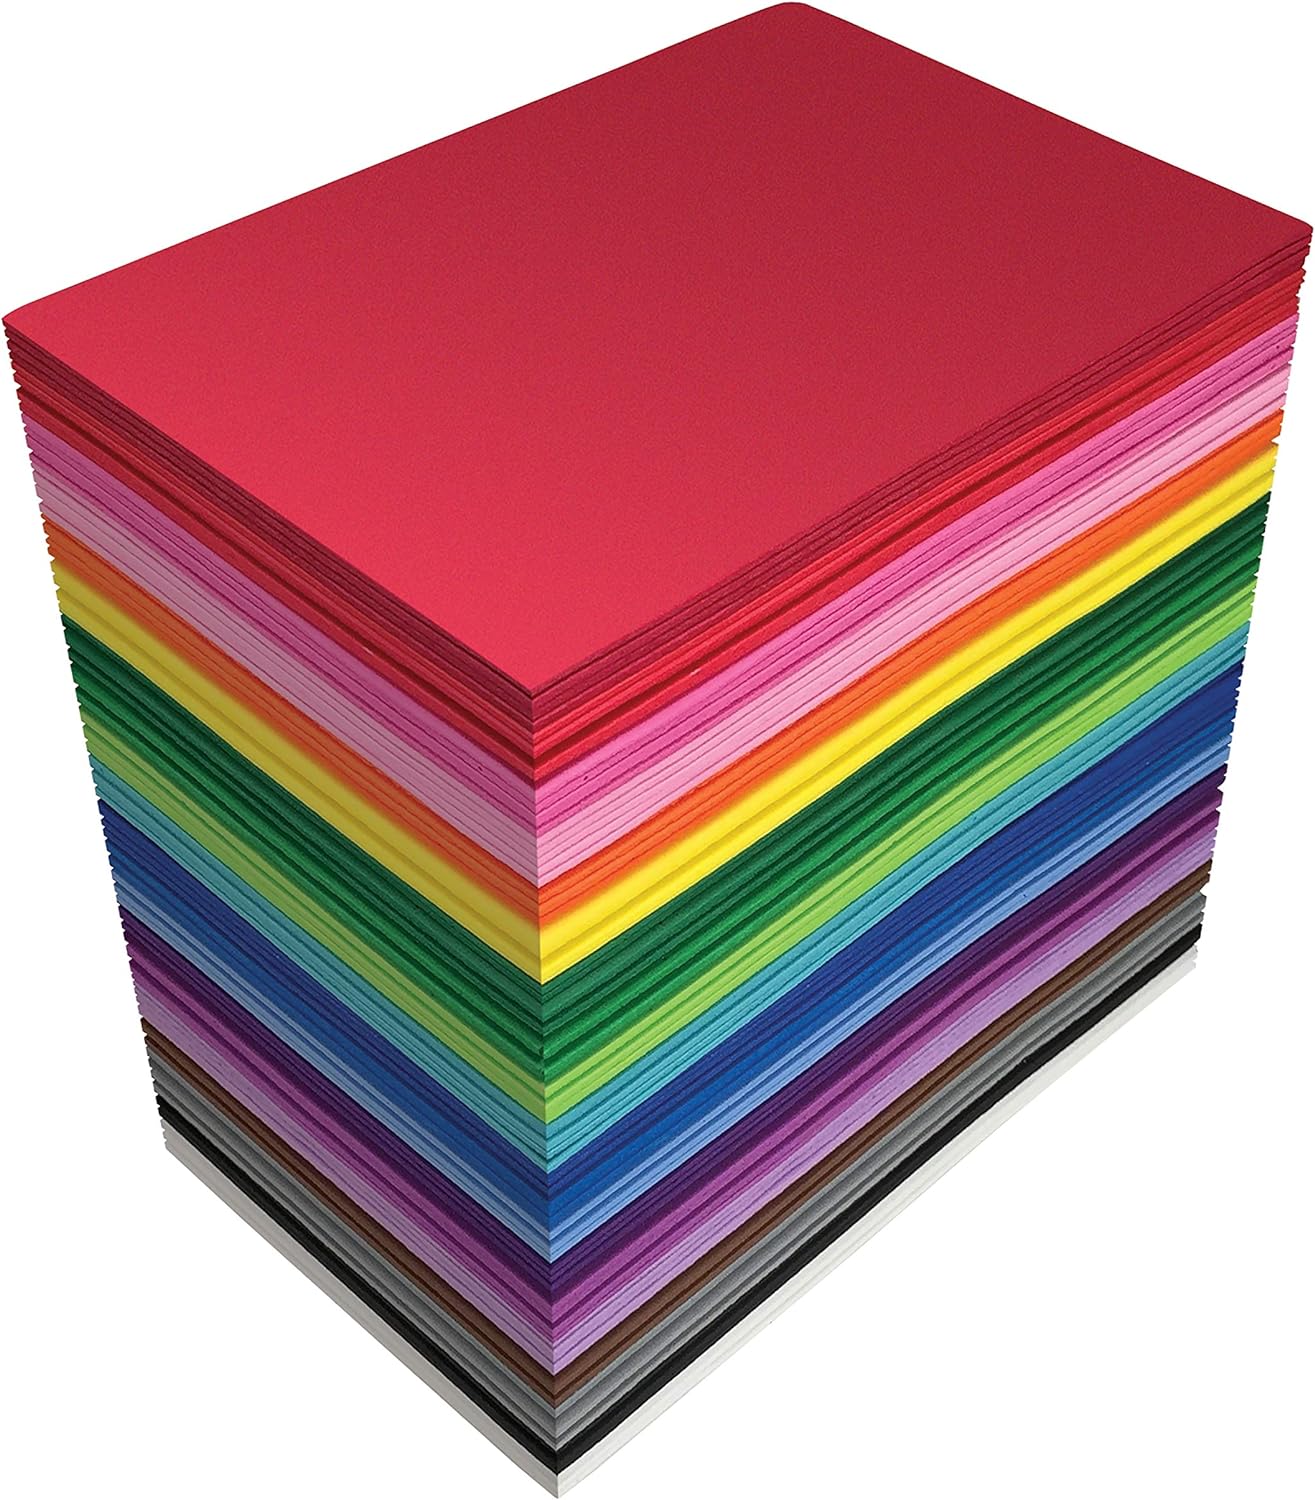 100 Pack Eva Foam Sheets 5.5 x 8.5 Inch Assorted Colors 20 Colors 2mm Thick For Arts And Crafts 100 Sheets By PAIDU